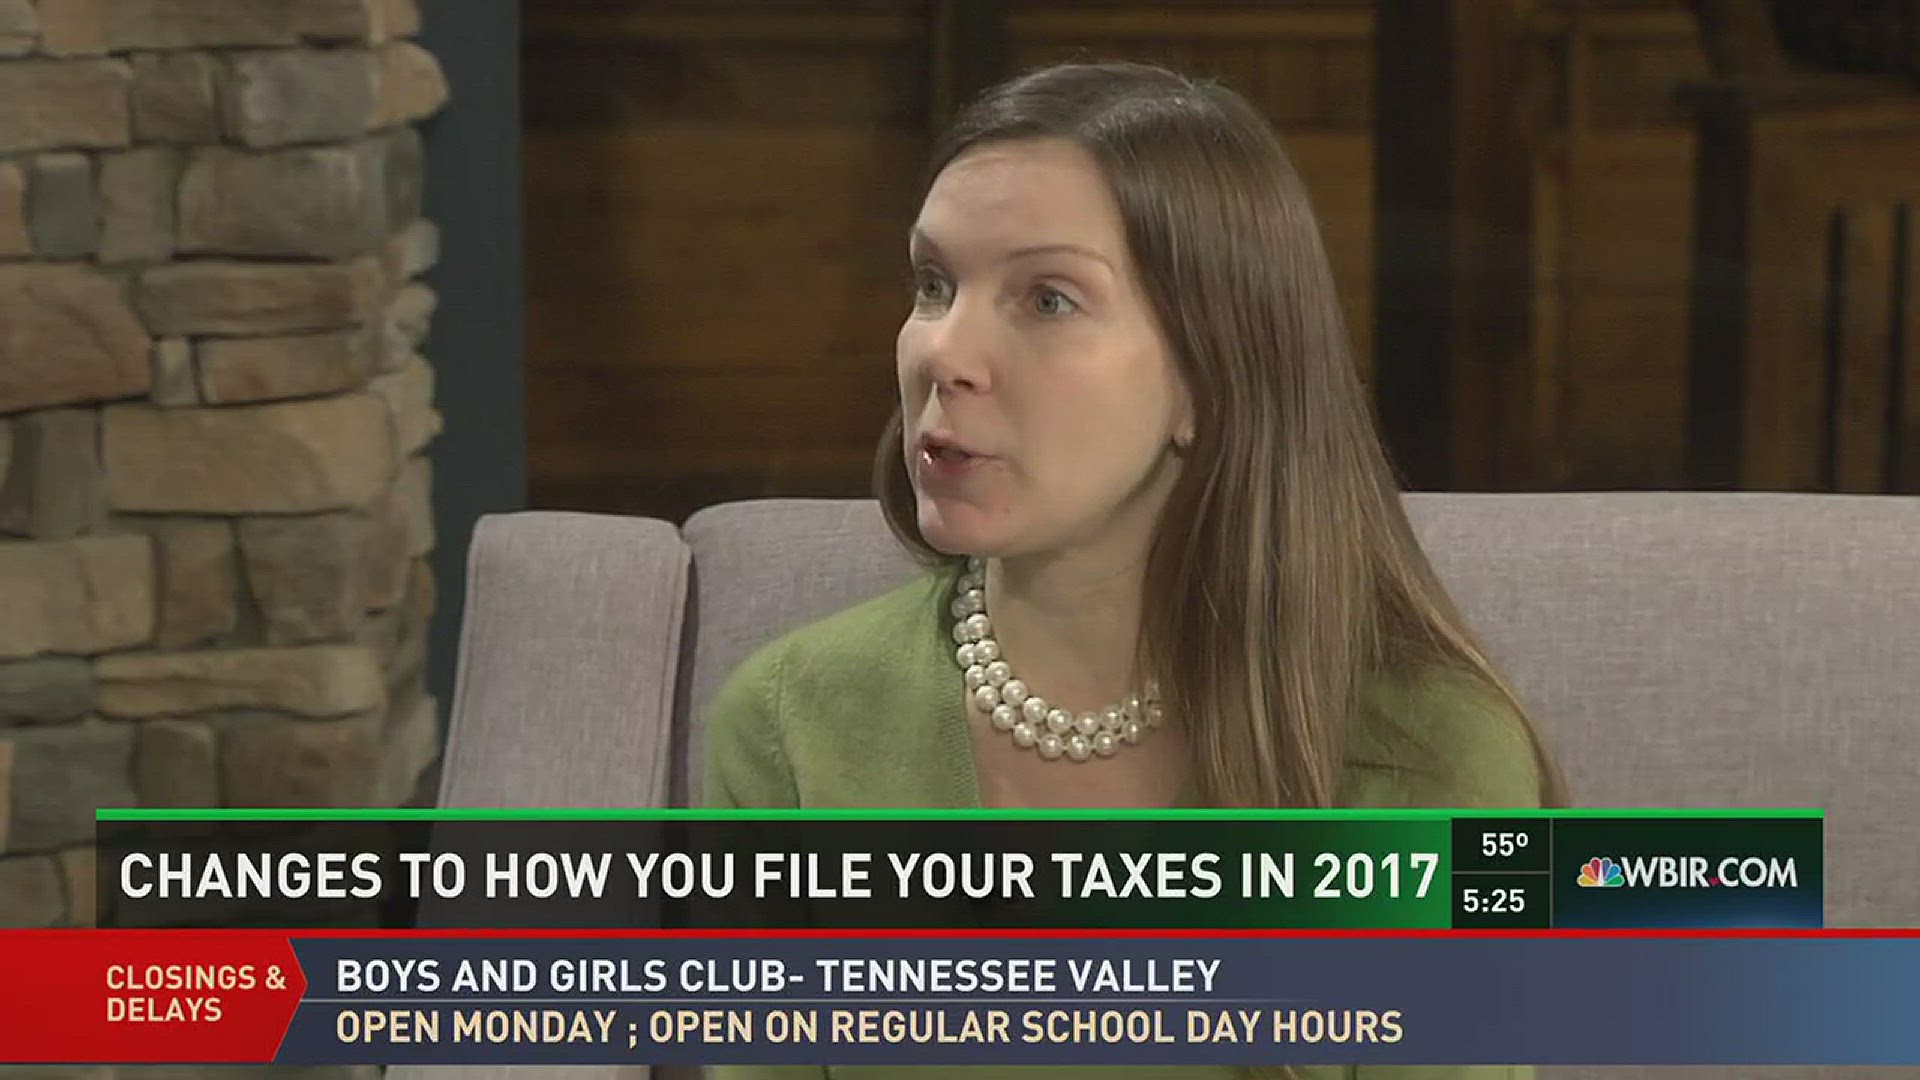 An interview with financial planner Laura Lyons about changes to the tax process in 2017.